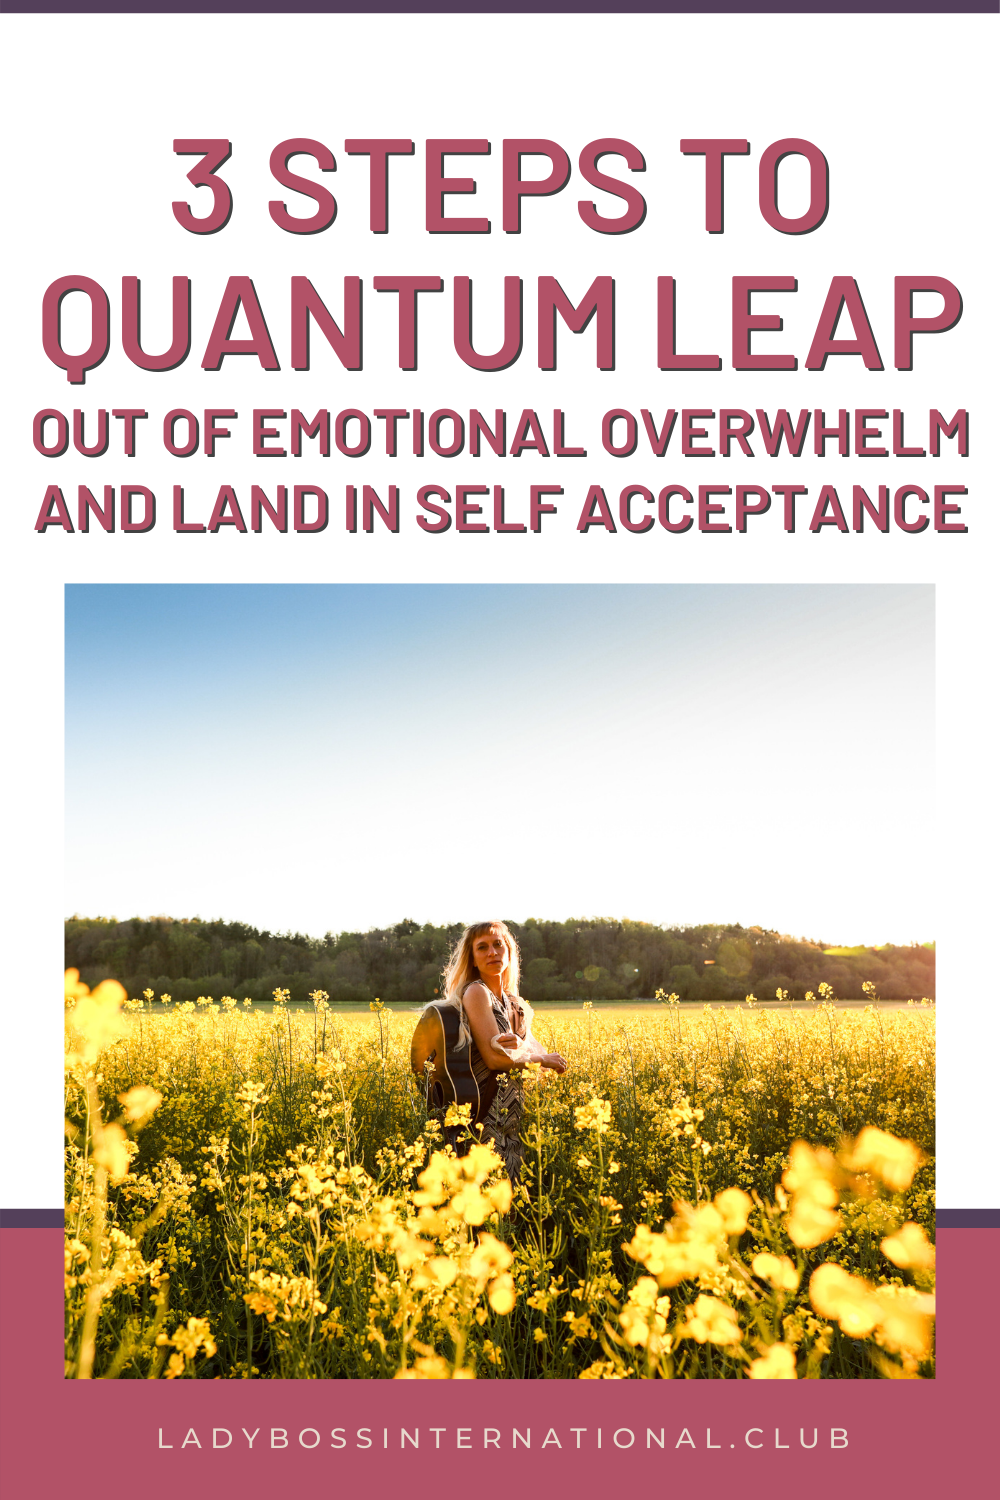 3 Steps to Quantum Leap Out of Emotional Overwhelm and Land in Self Acceptance 1.png